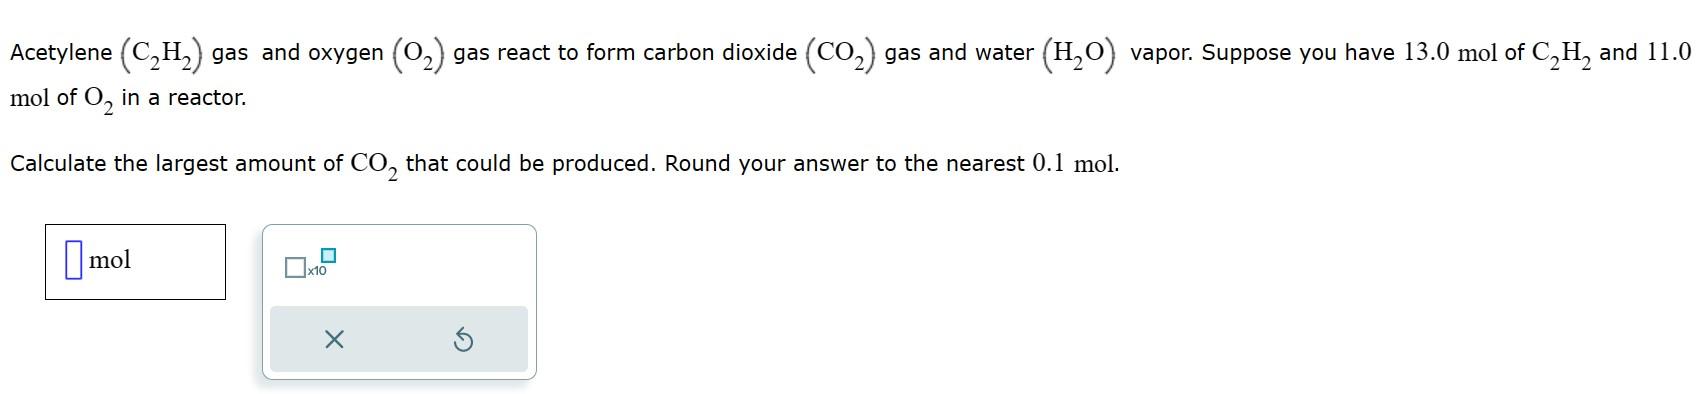 Solved Acetylene (C2H2) gas and oxygen (O2) gas react to | Chegg.com